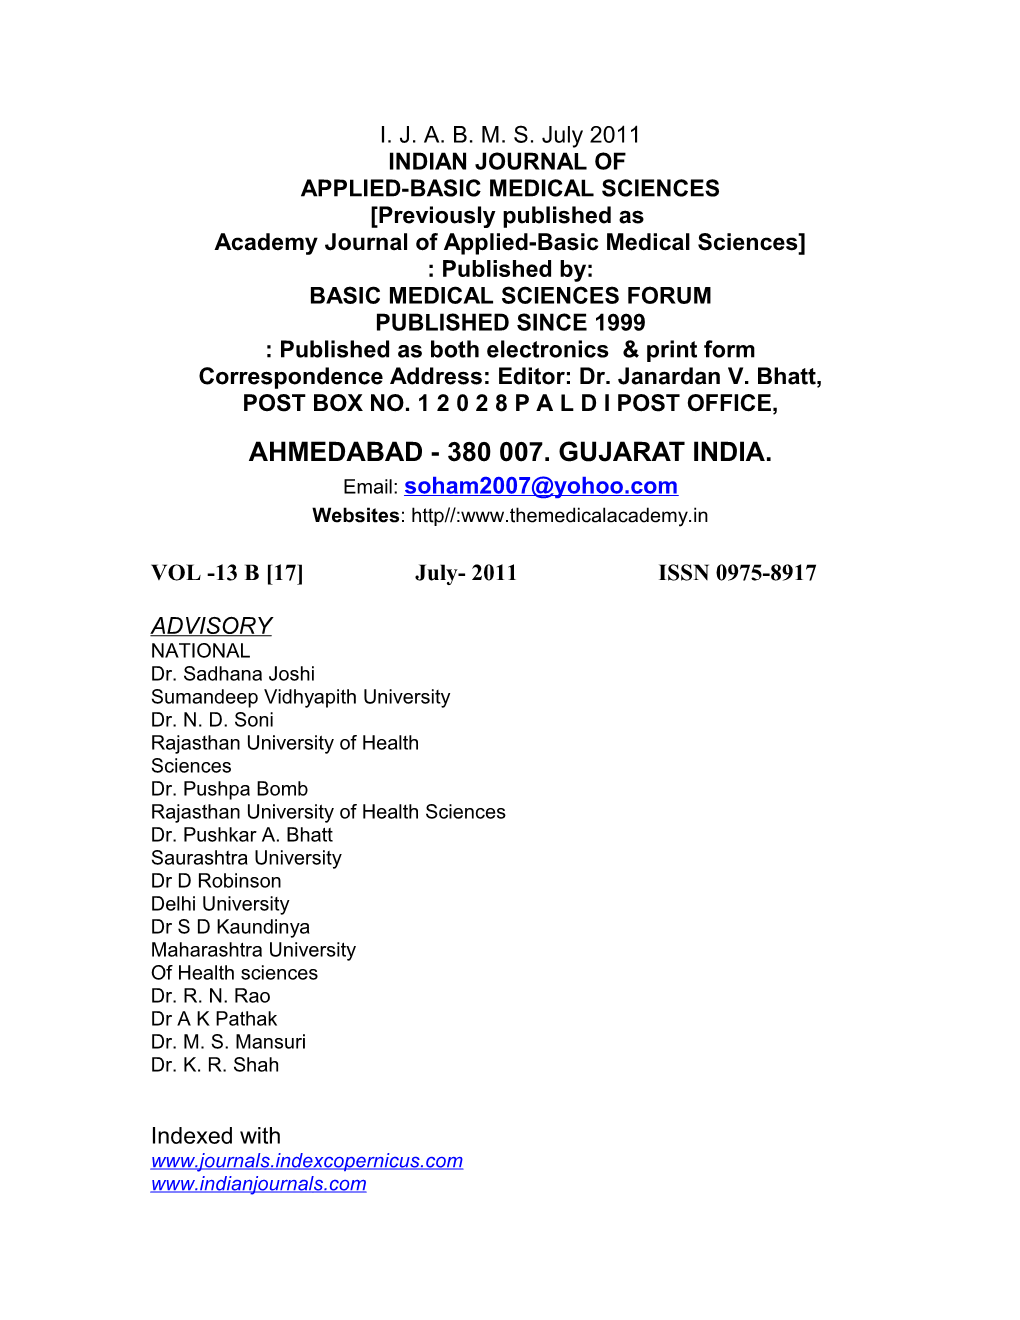 Academy Journal of Applied-Basic Medical Sciences